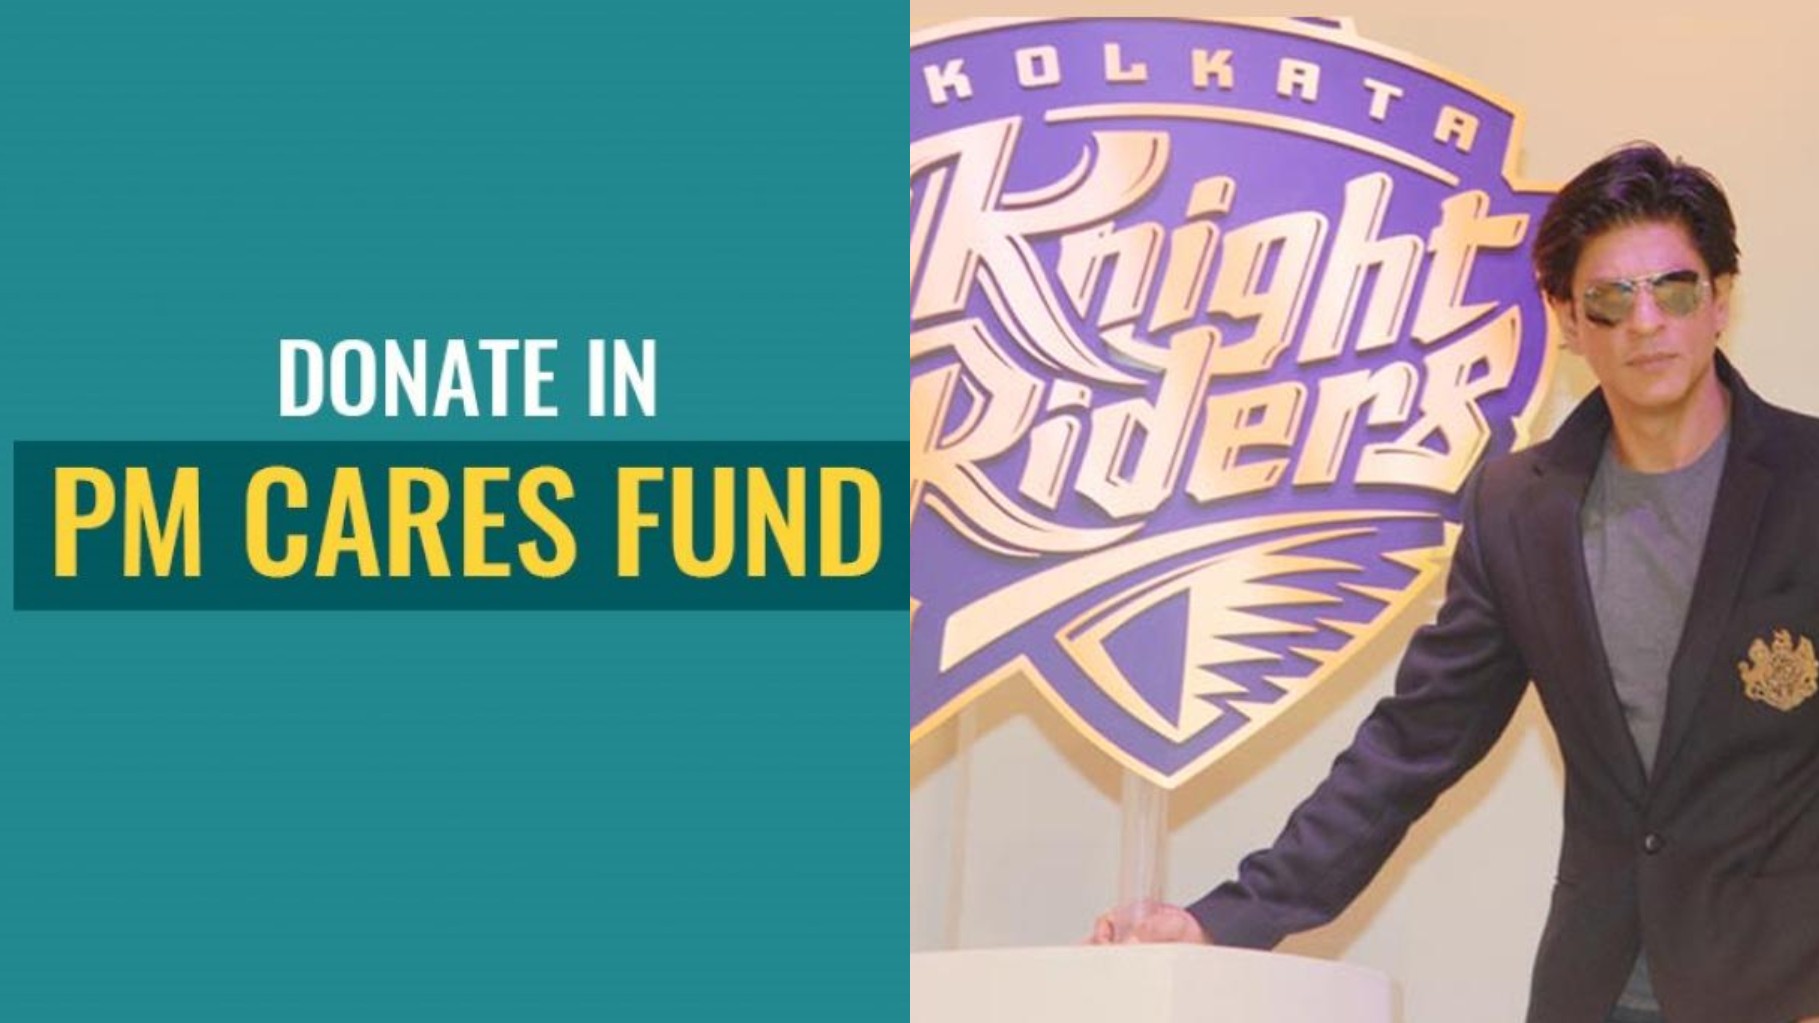 IPL 2020: Kolkata Knight Riders (KKR) donates to PM Cares Fund in the fight against COVID-19